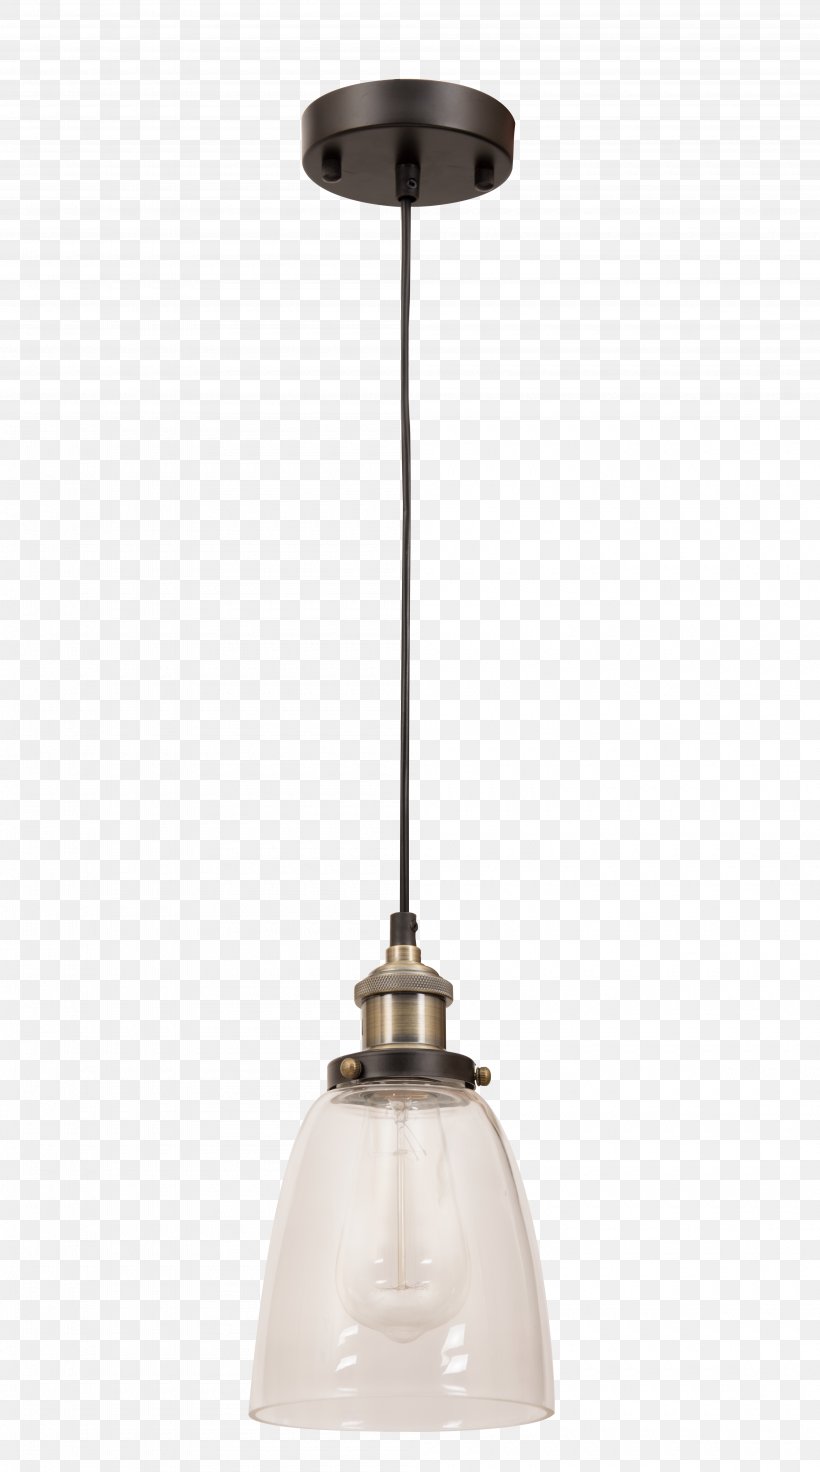 Charms & Pendants Lamp Shades Light Fixture, PNG, 4000x7181px, Charms Pendants, Ceiling, Ceiling Fixture, Glass, Incandescent Light Bulb Download Free